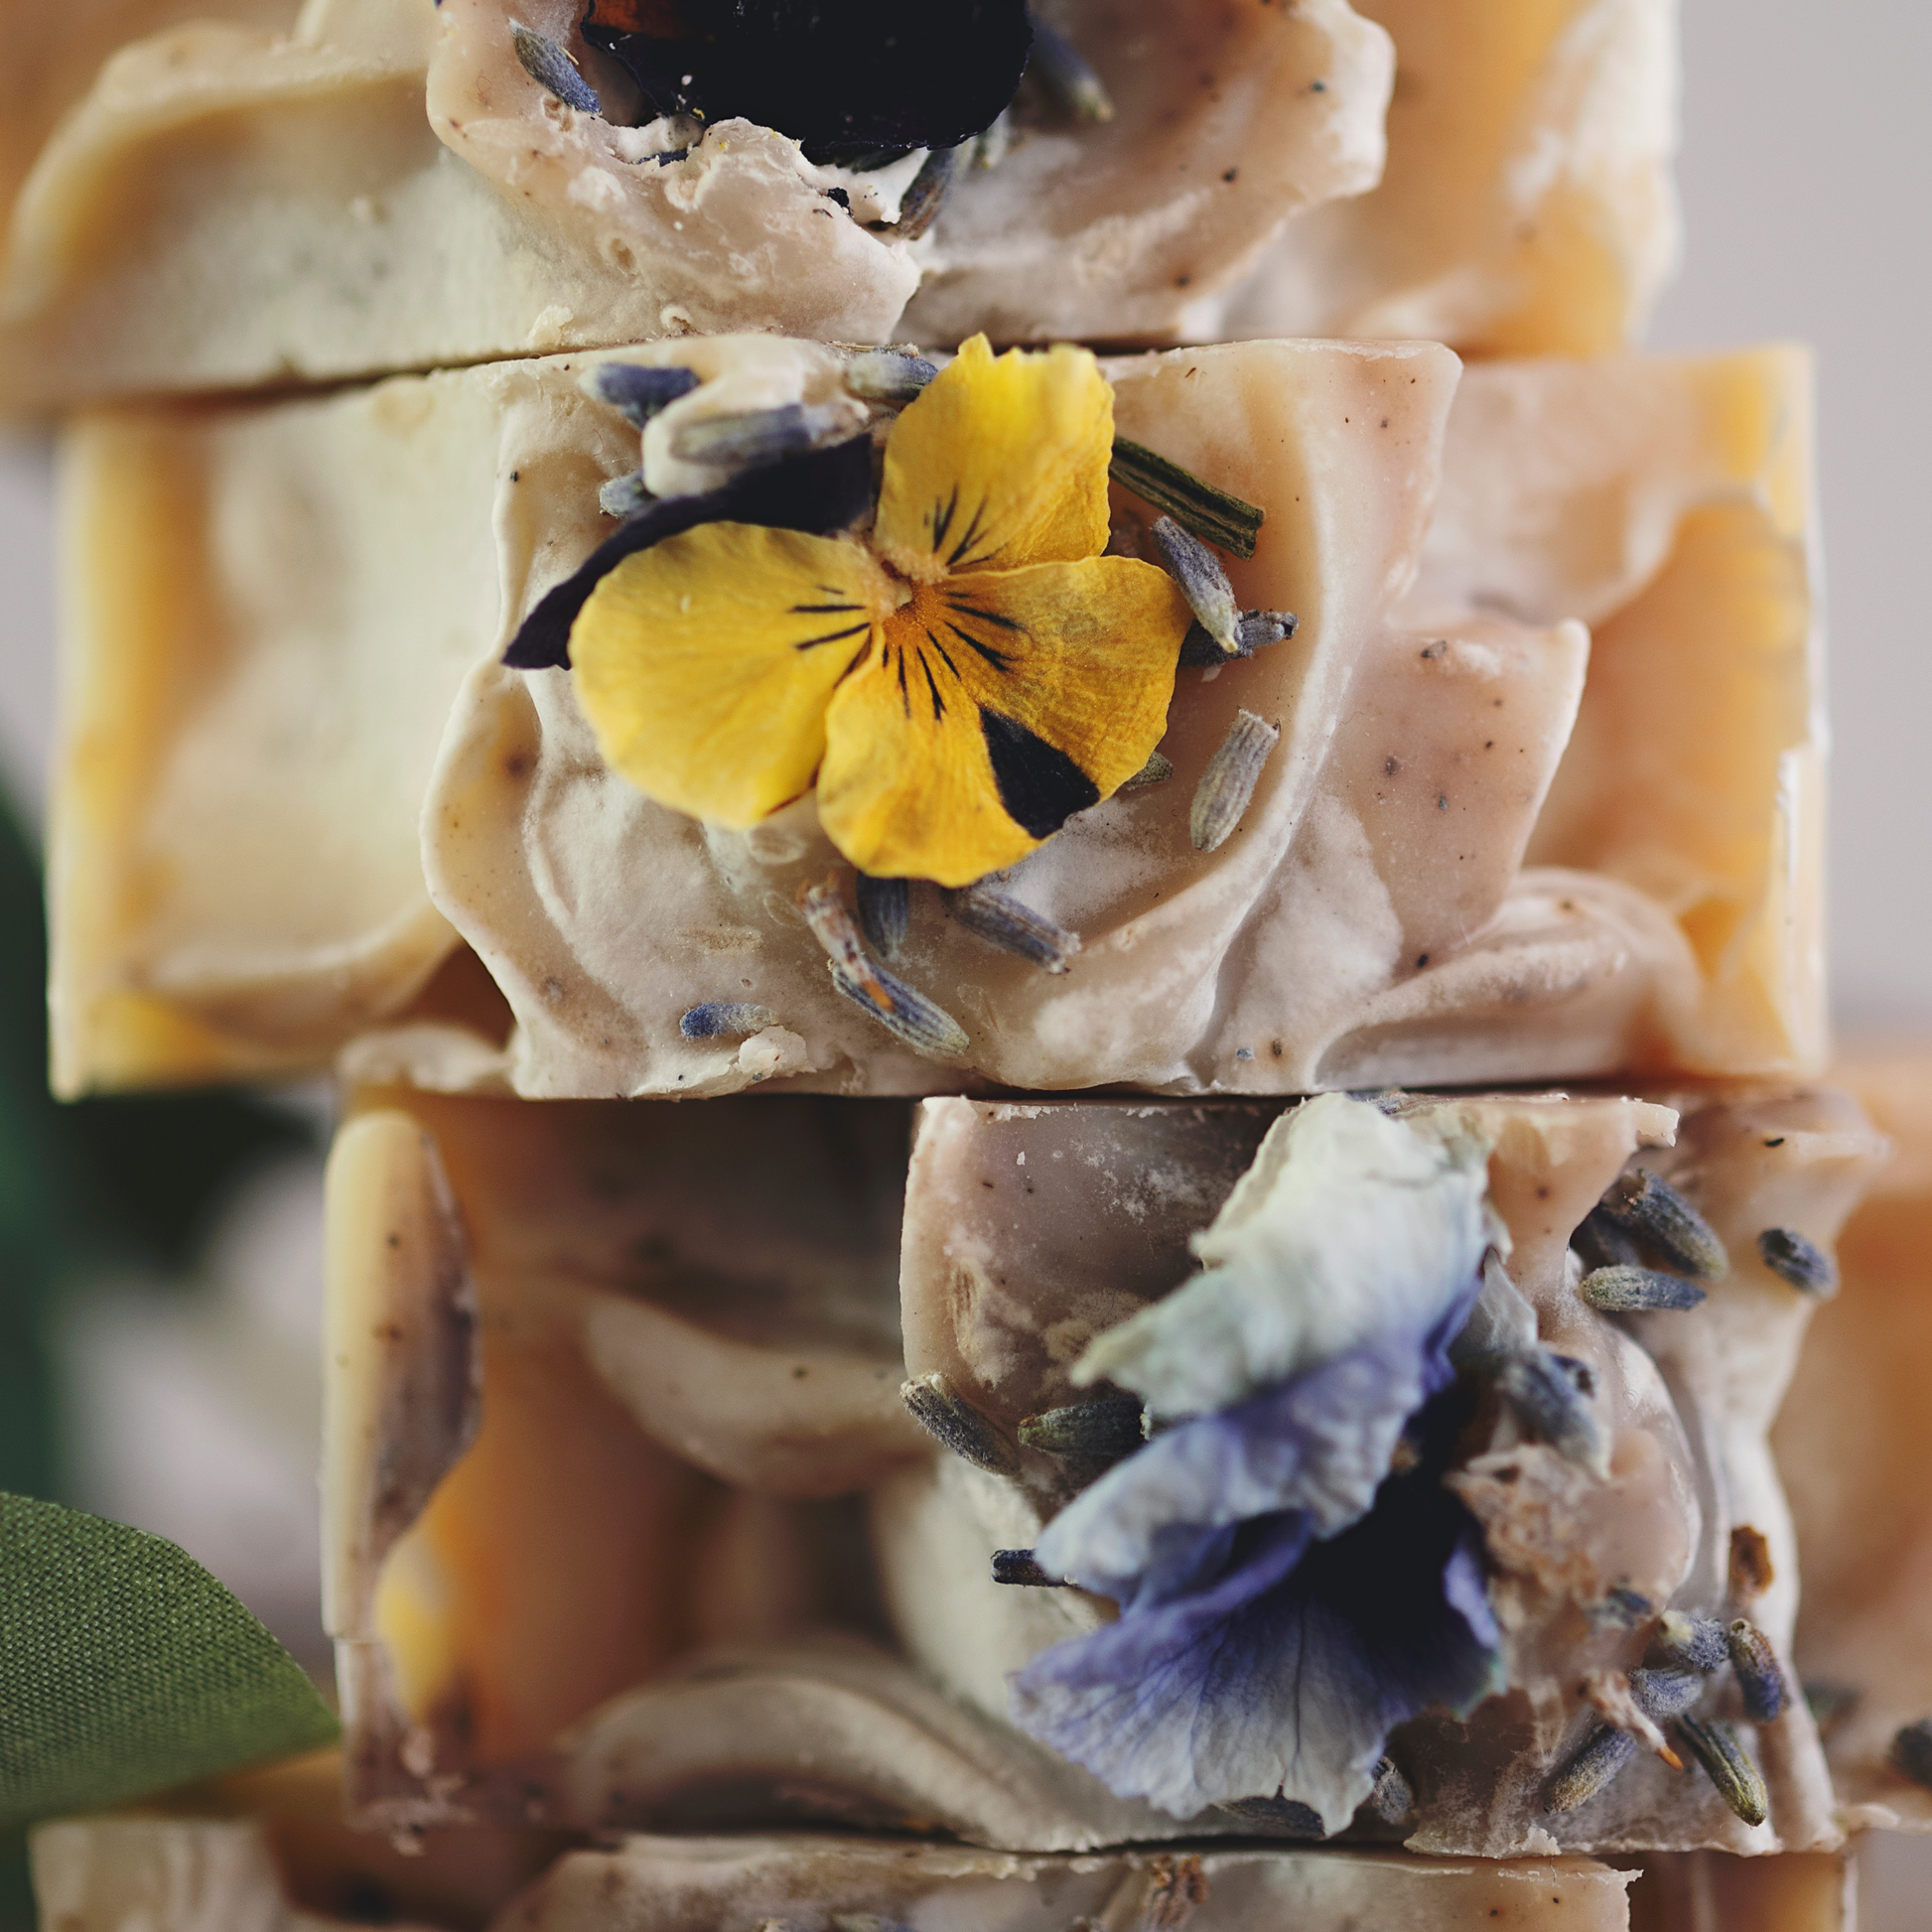 A close up view of Blnded Bliss Lavender Frankincense soap bars, botanicals prominent.